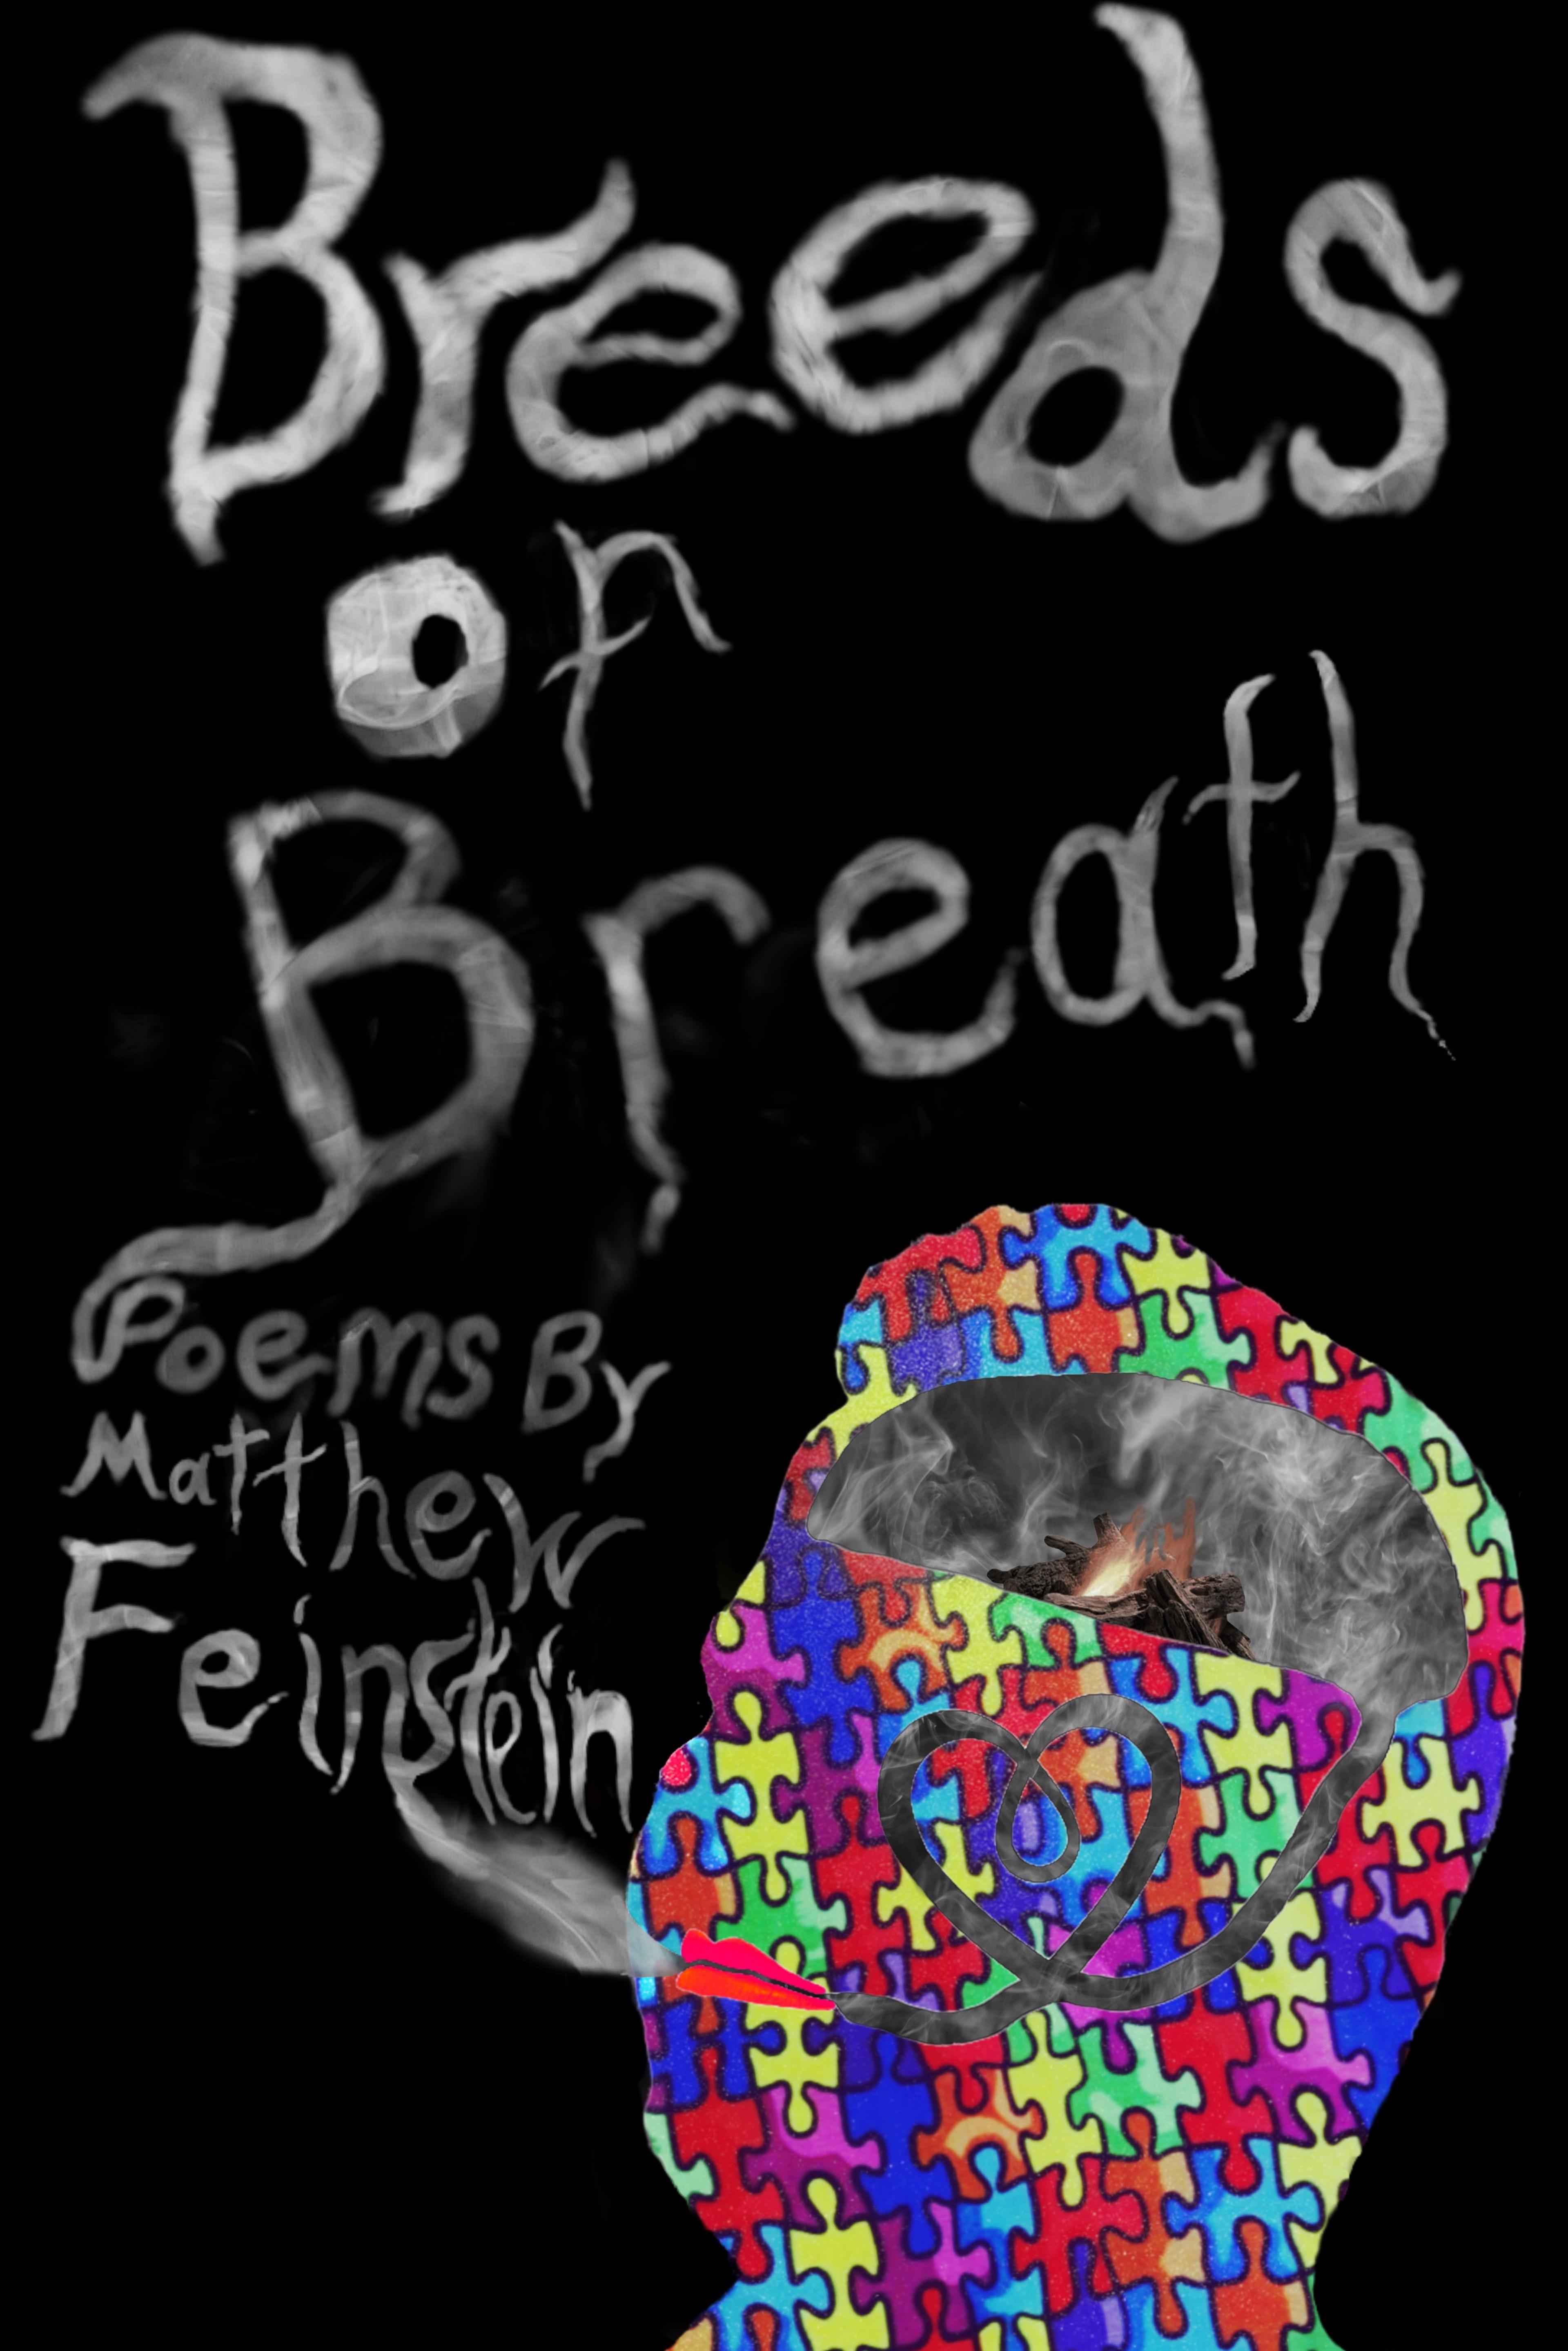 Book cover of Breeds of Breath by Matthew Feinstein